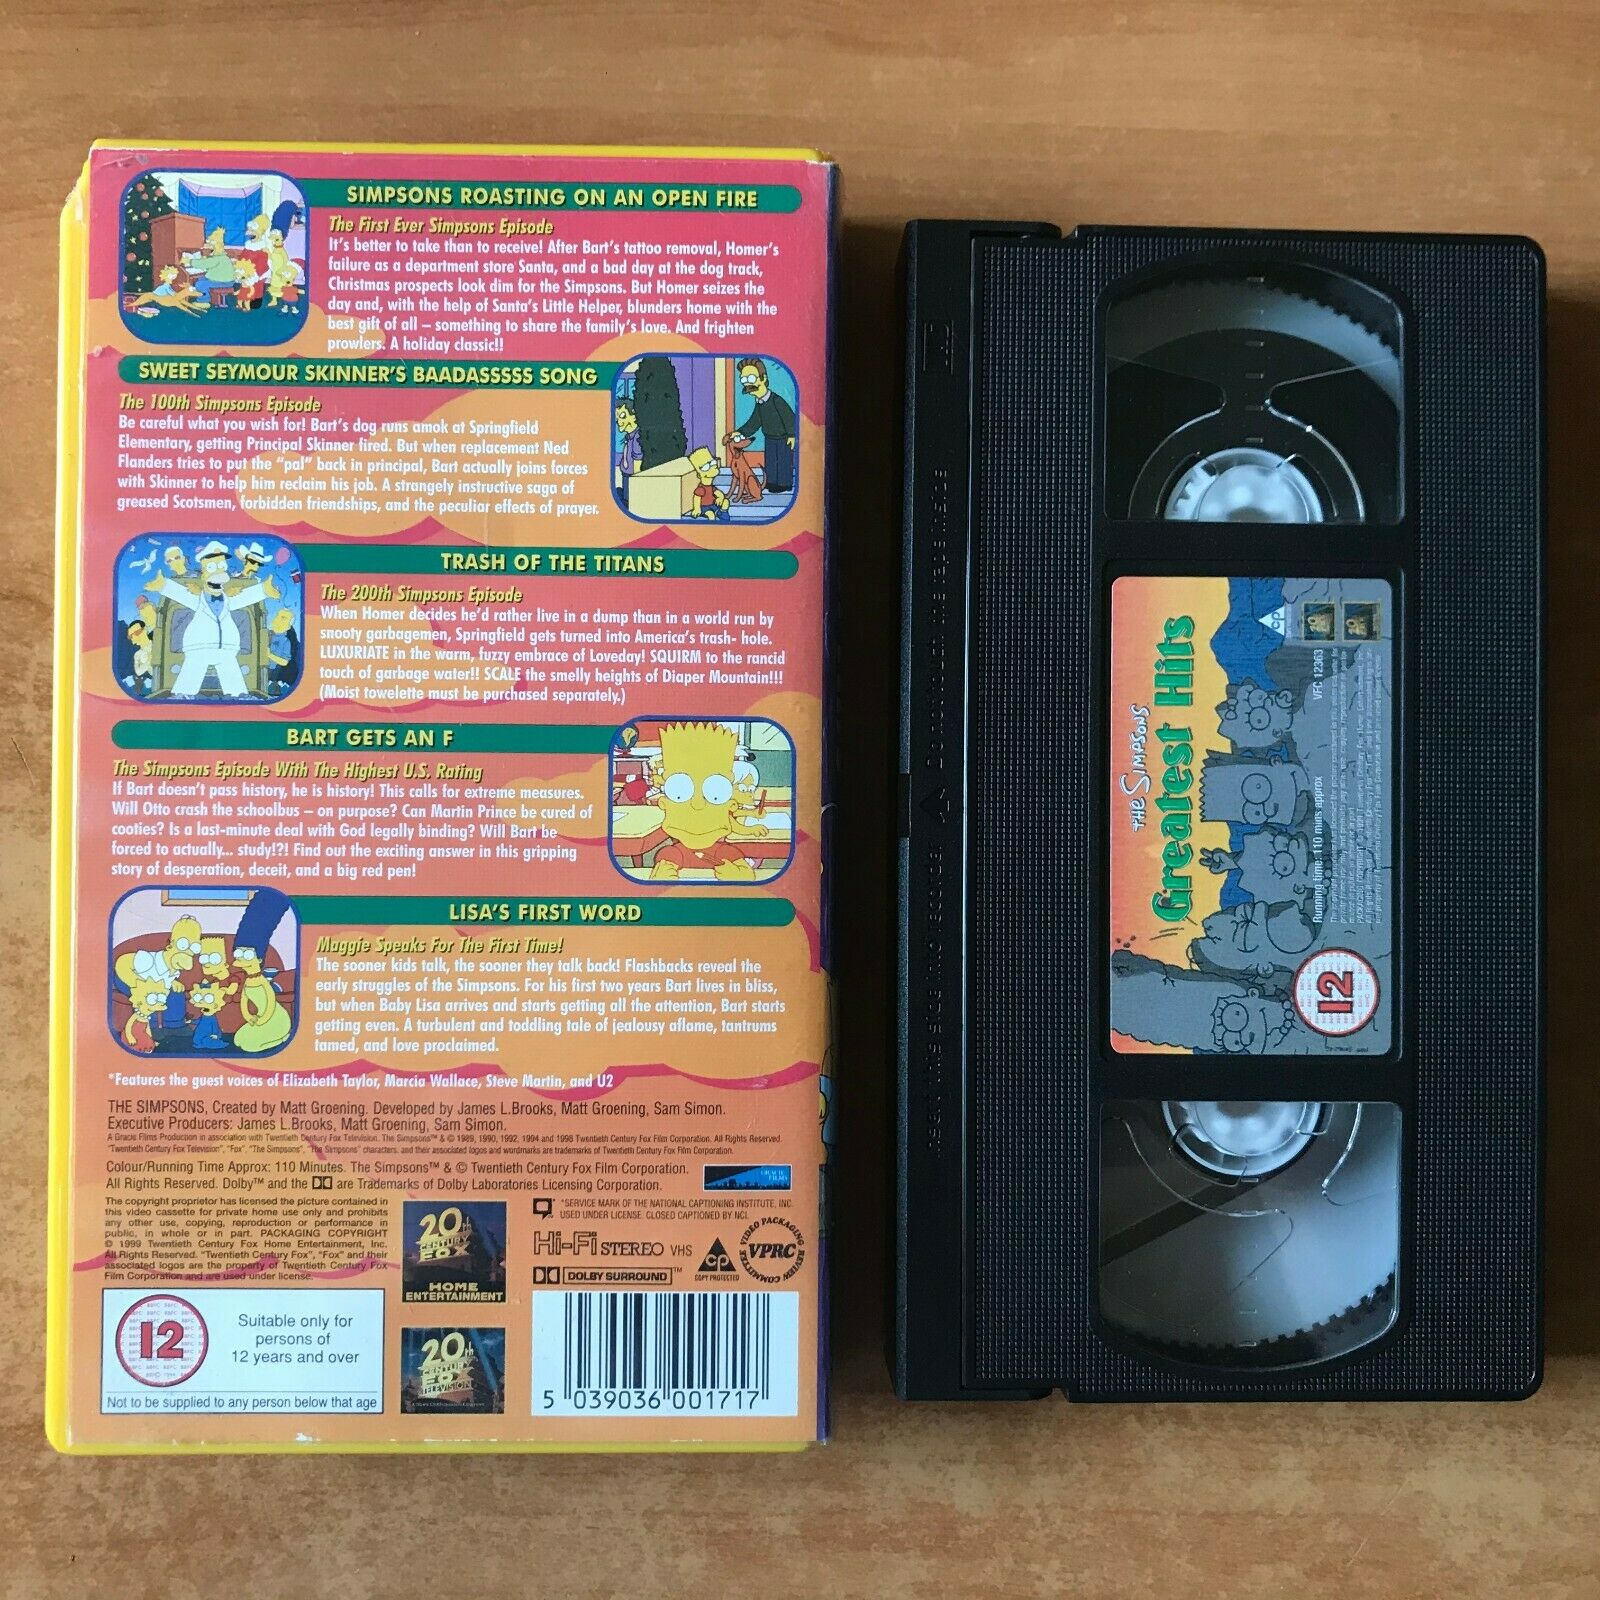 The Simpsons [Greatest Hits]: "Barts Gets And F" - Animated - Children's - VHS-